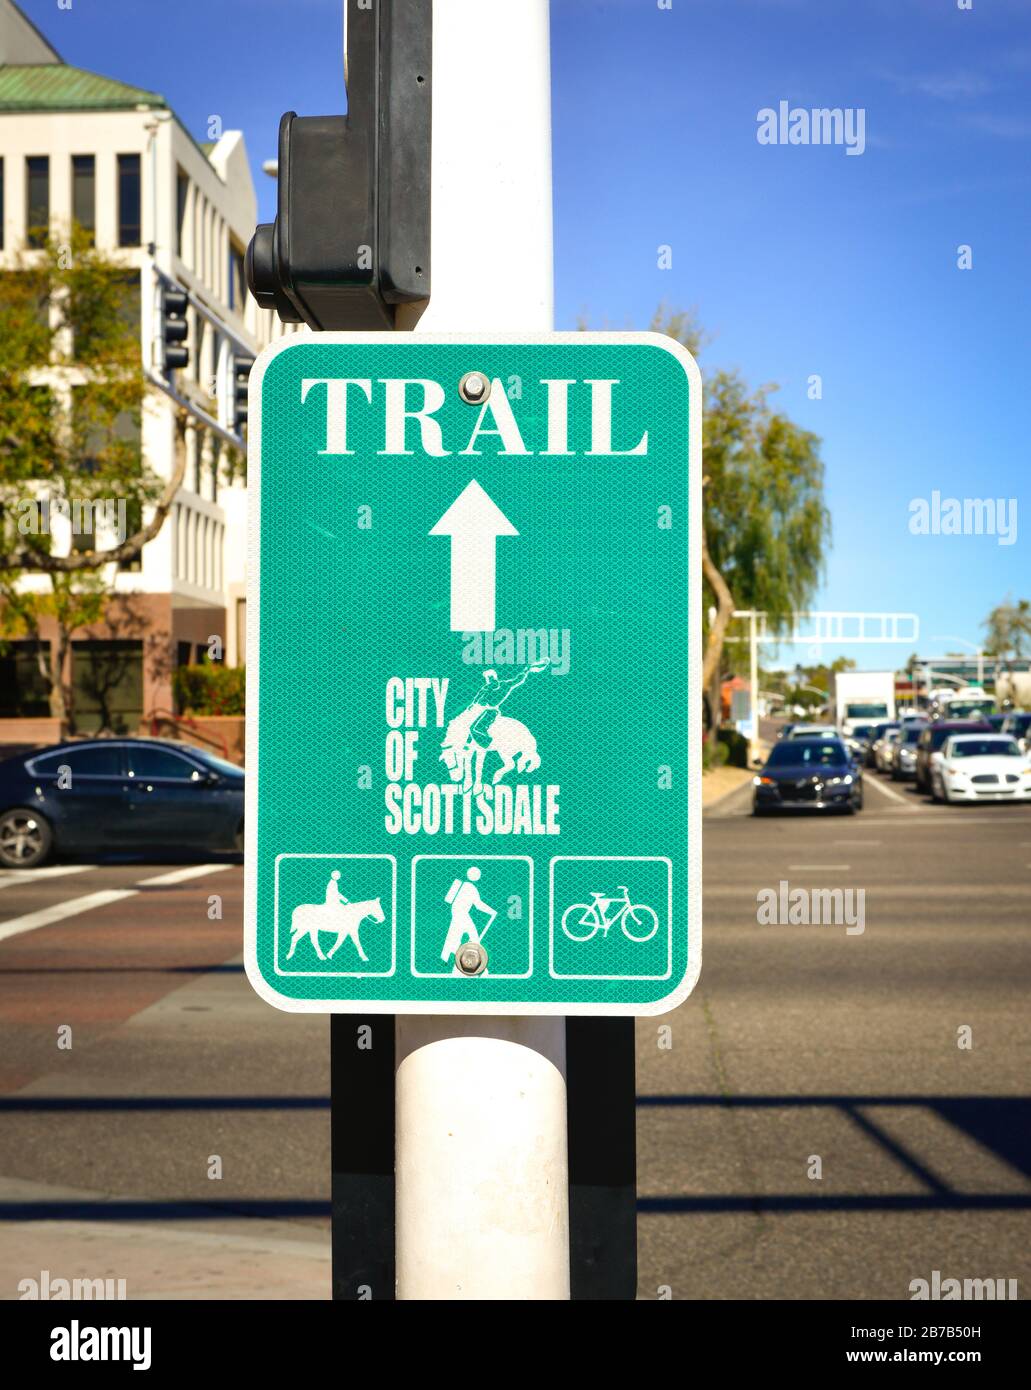 A City of Scottsdale bronco rider logo on green and white Trail directional sign for horseback trail, hiking trail and cycling trail in Scottsdale, AZ Stock Photo